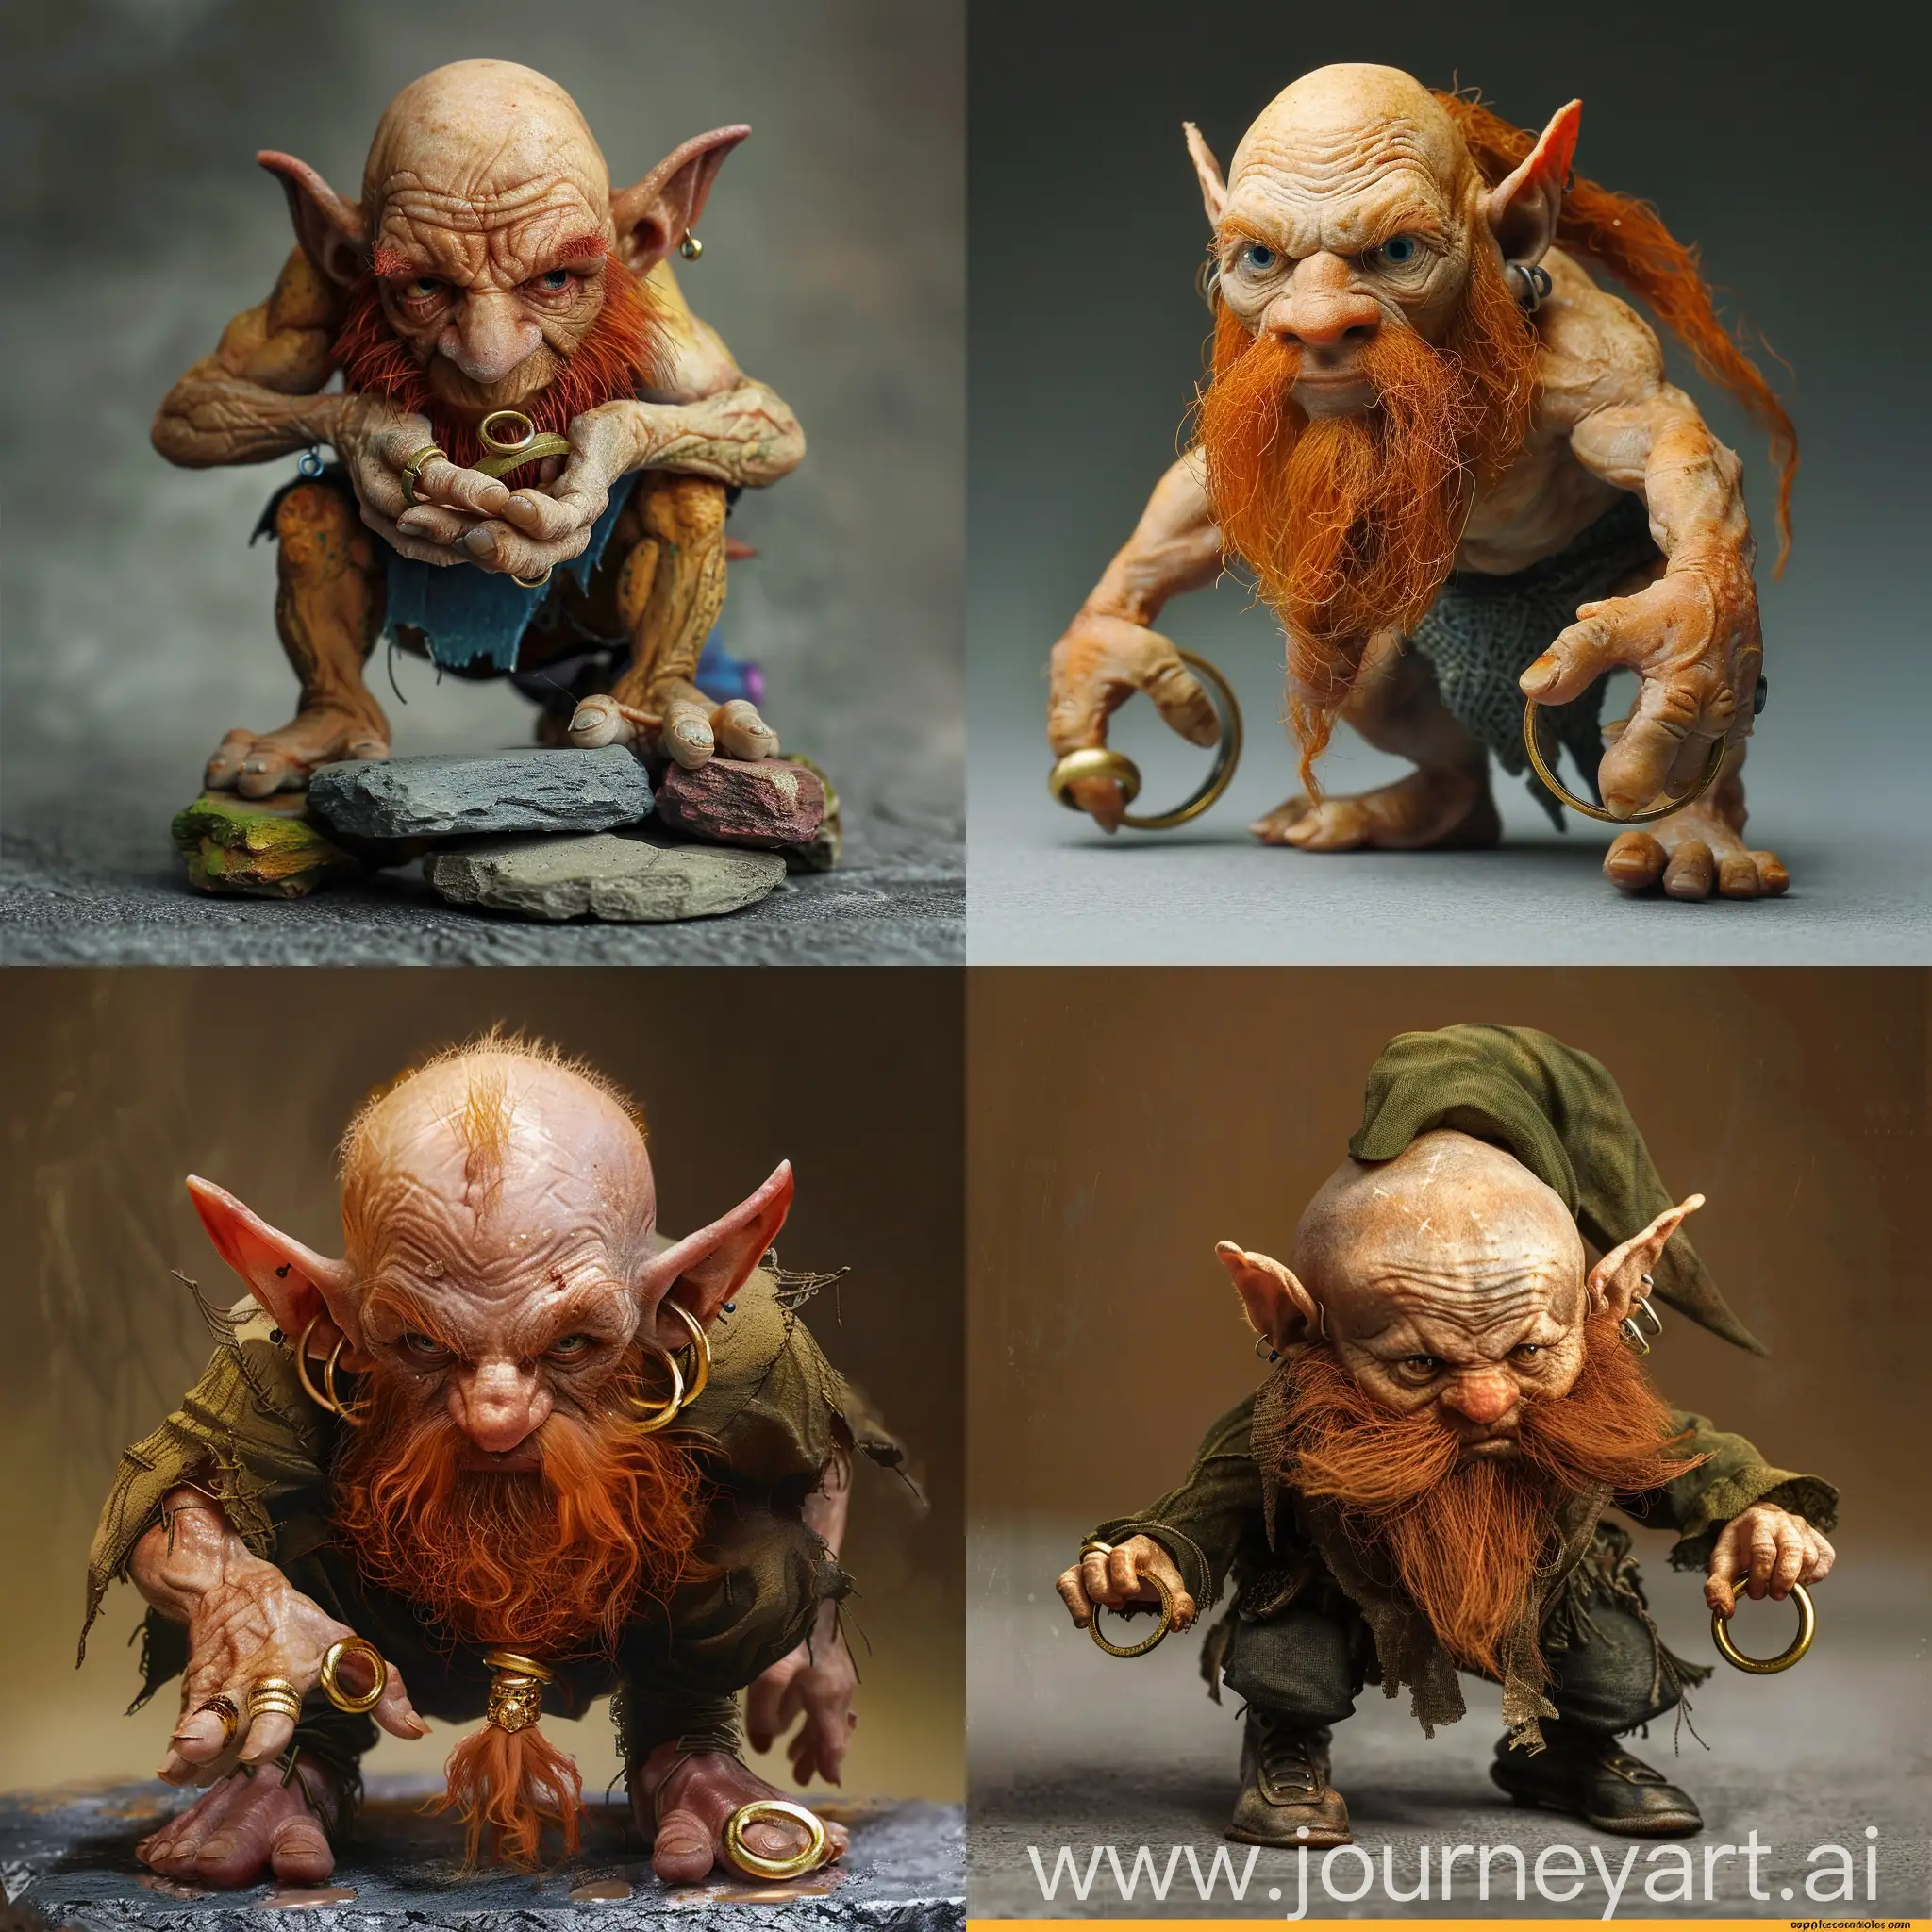 Fantasy-Goblin-and-Dwarf-Exchange-Rings-with-Tiptoe-Dance